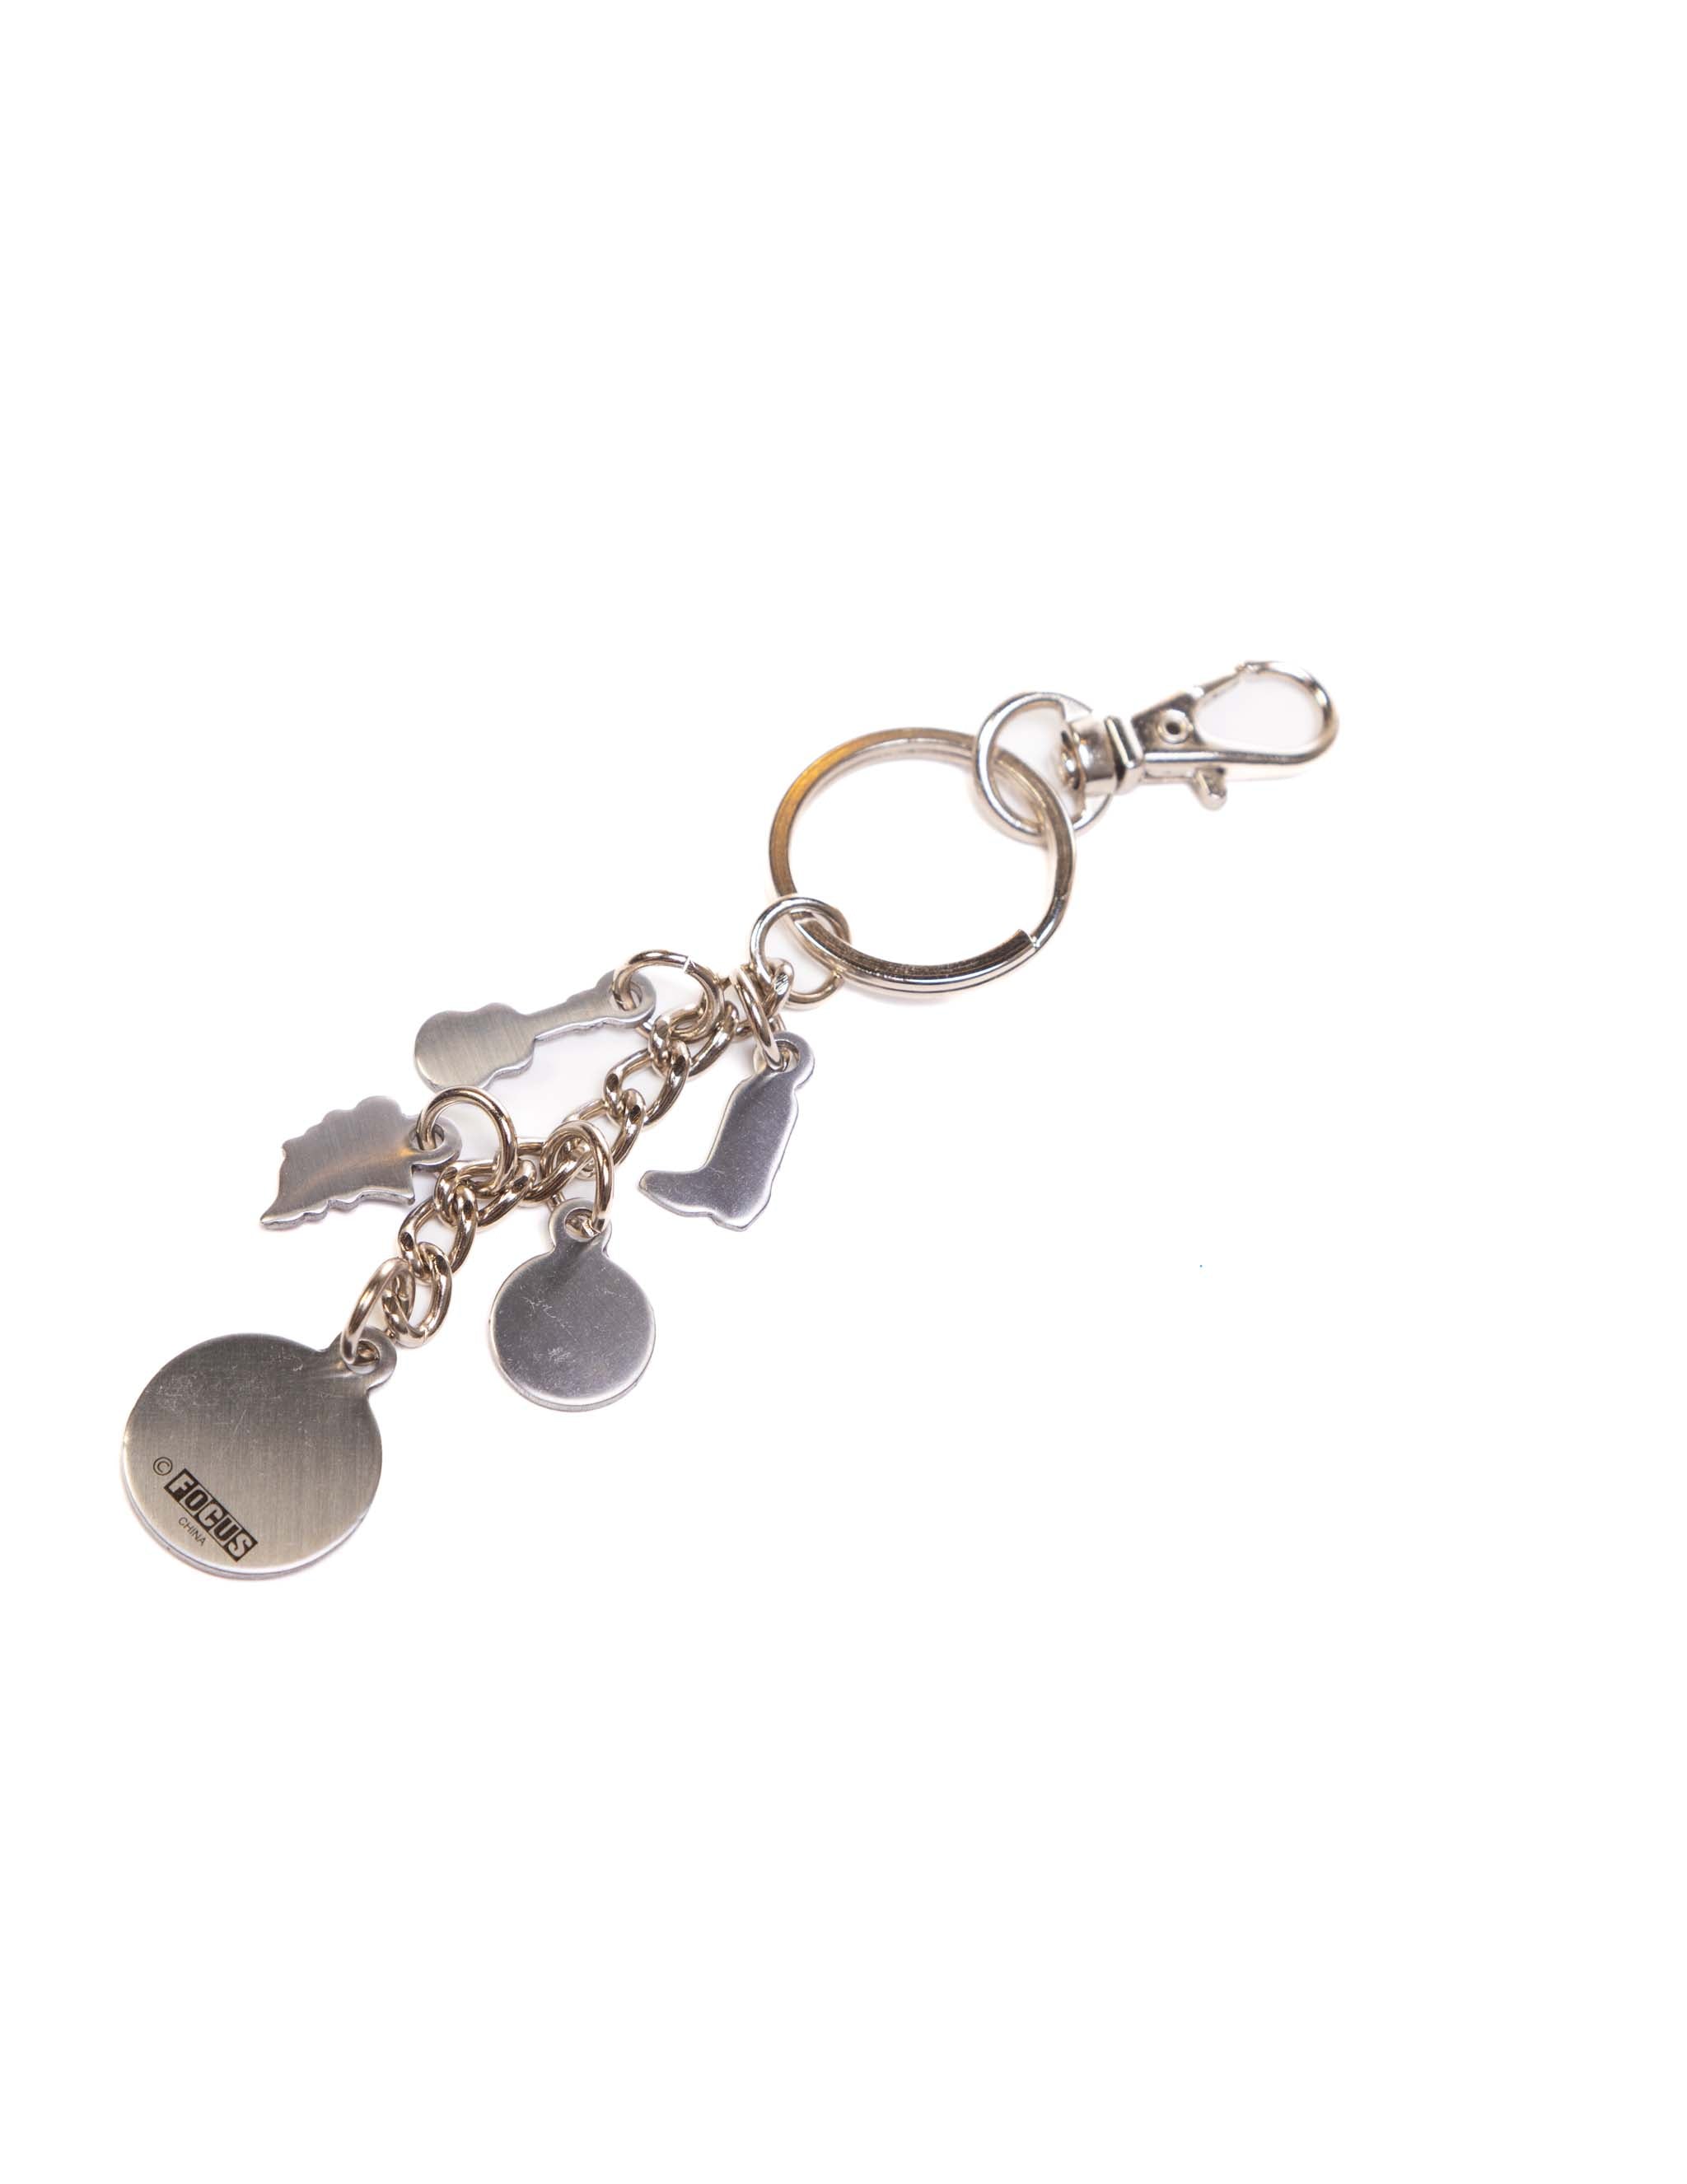 ACL Live Charmed Key Chain